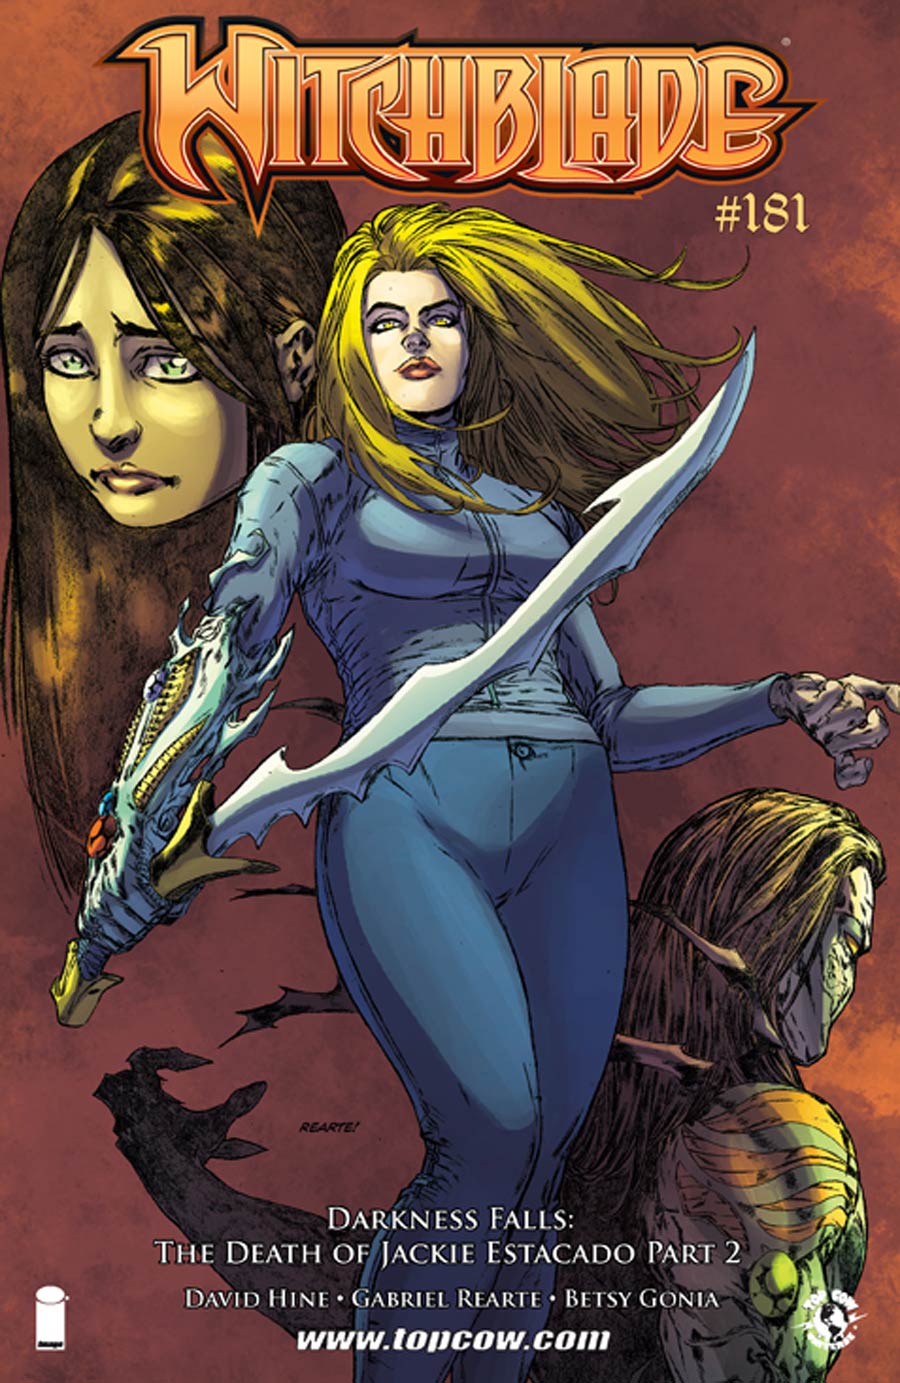 Witchblade #181 Cover A Gabriel Rearte & Betsy Gonia